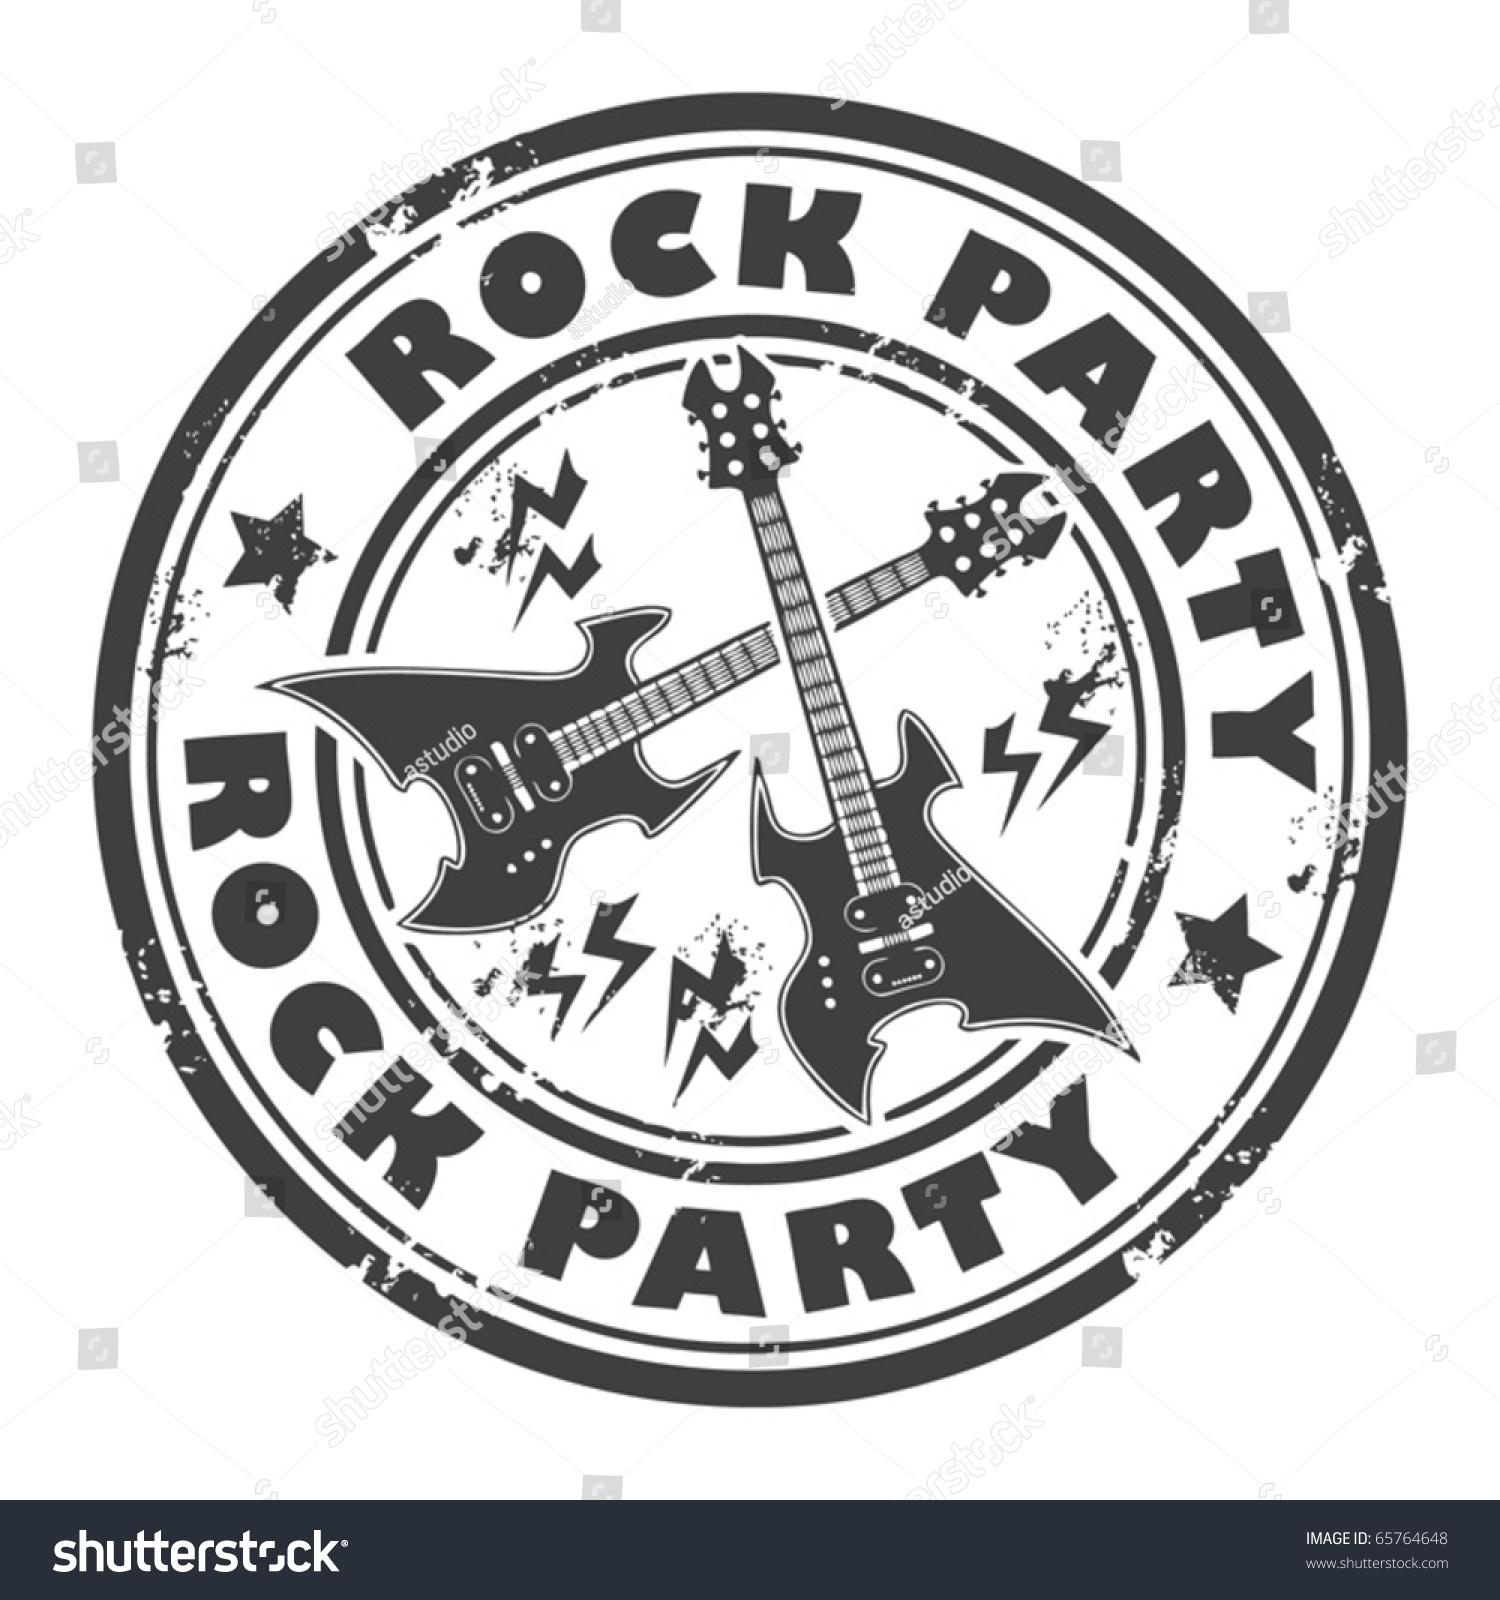 stock-vector-grunge-rubber-stamp-with-th